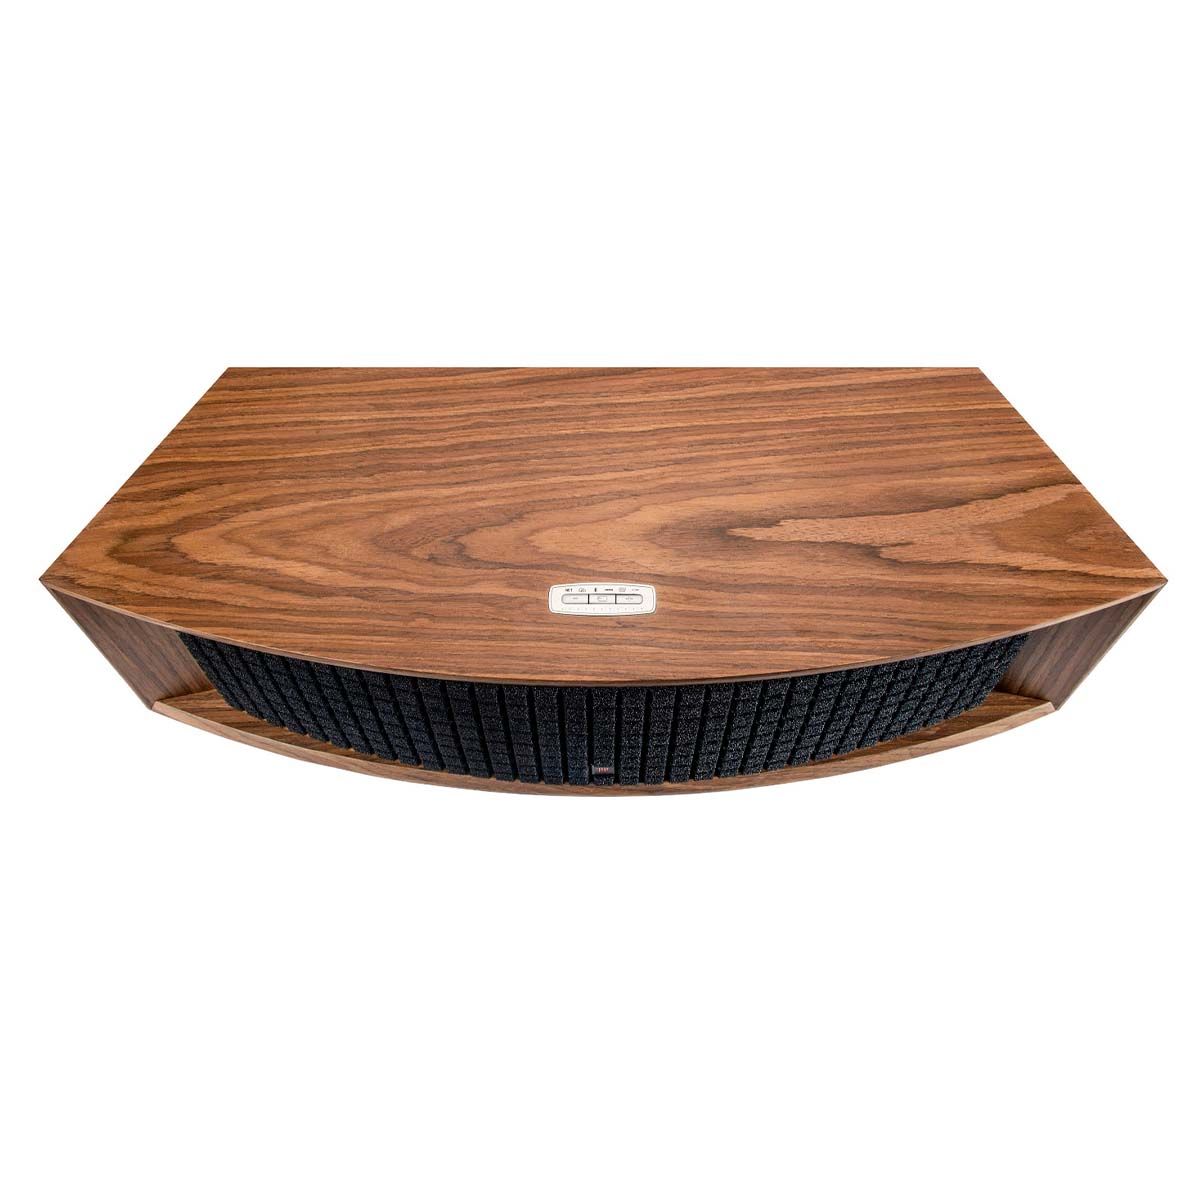 JBL L75ms Music System - Walnut top view with grille